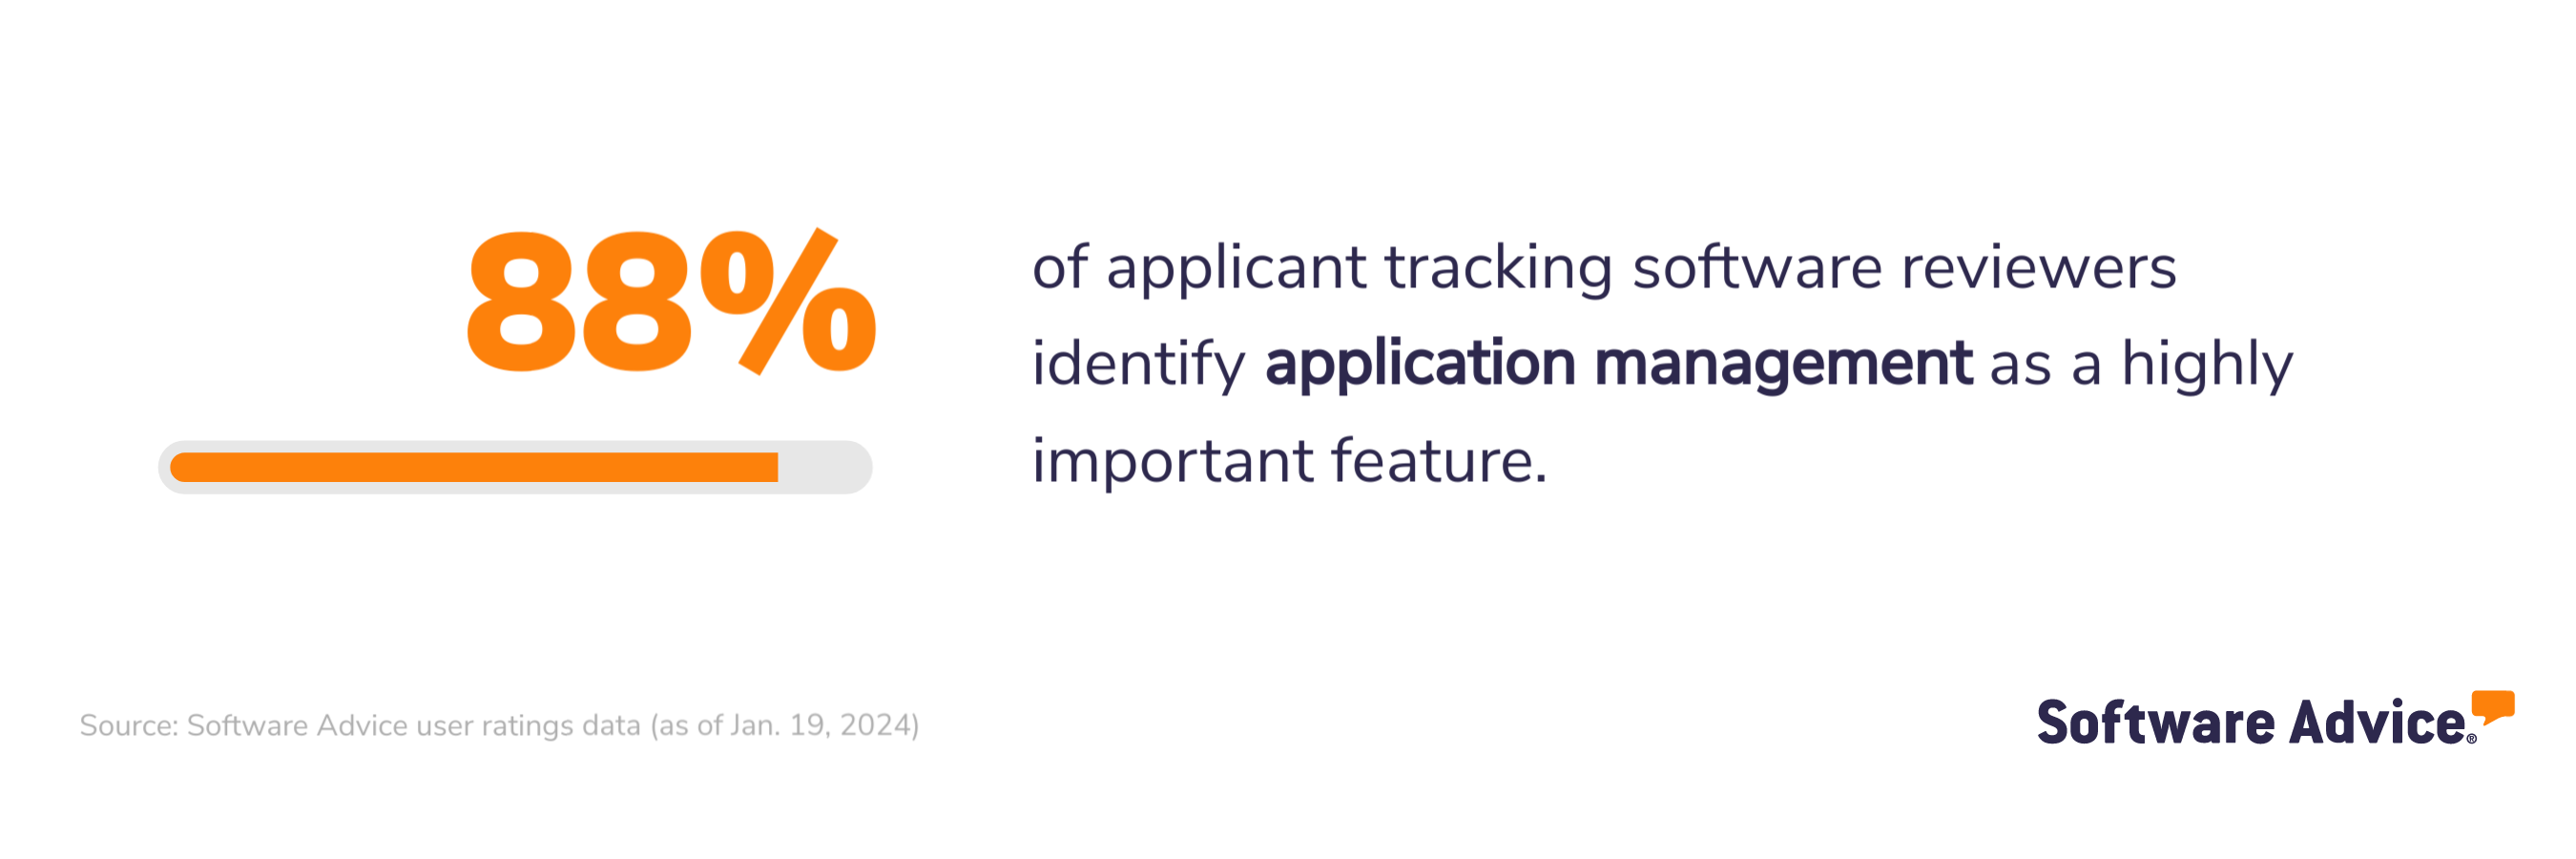 88% of applicant tracking software reviewers identify application management as a highly important feature.